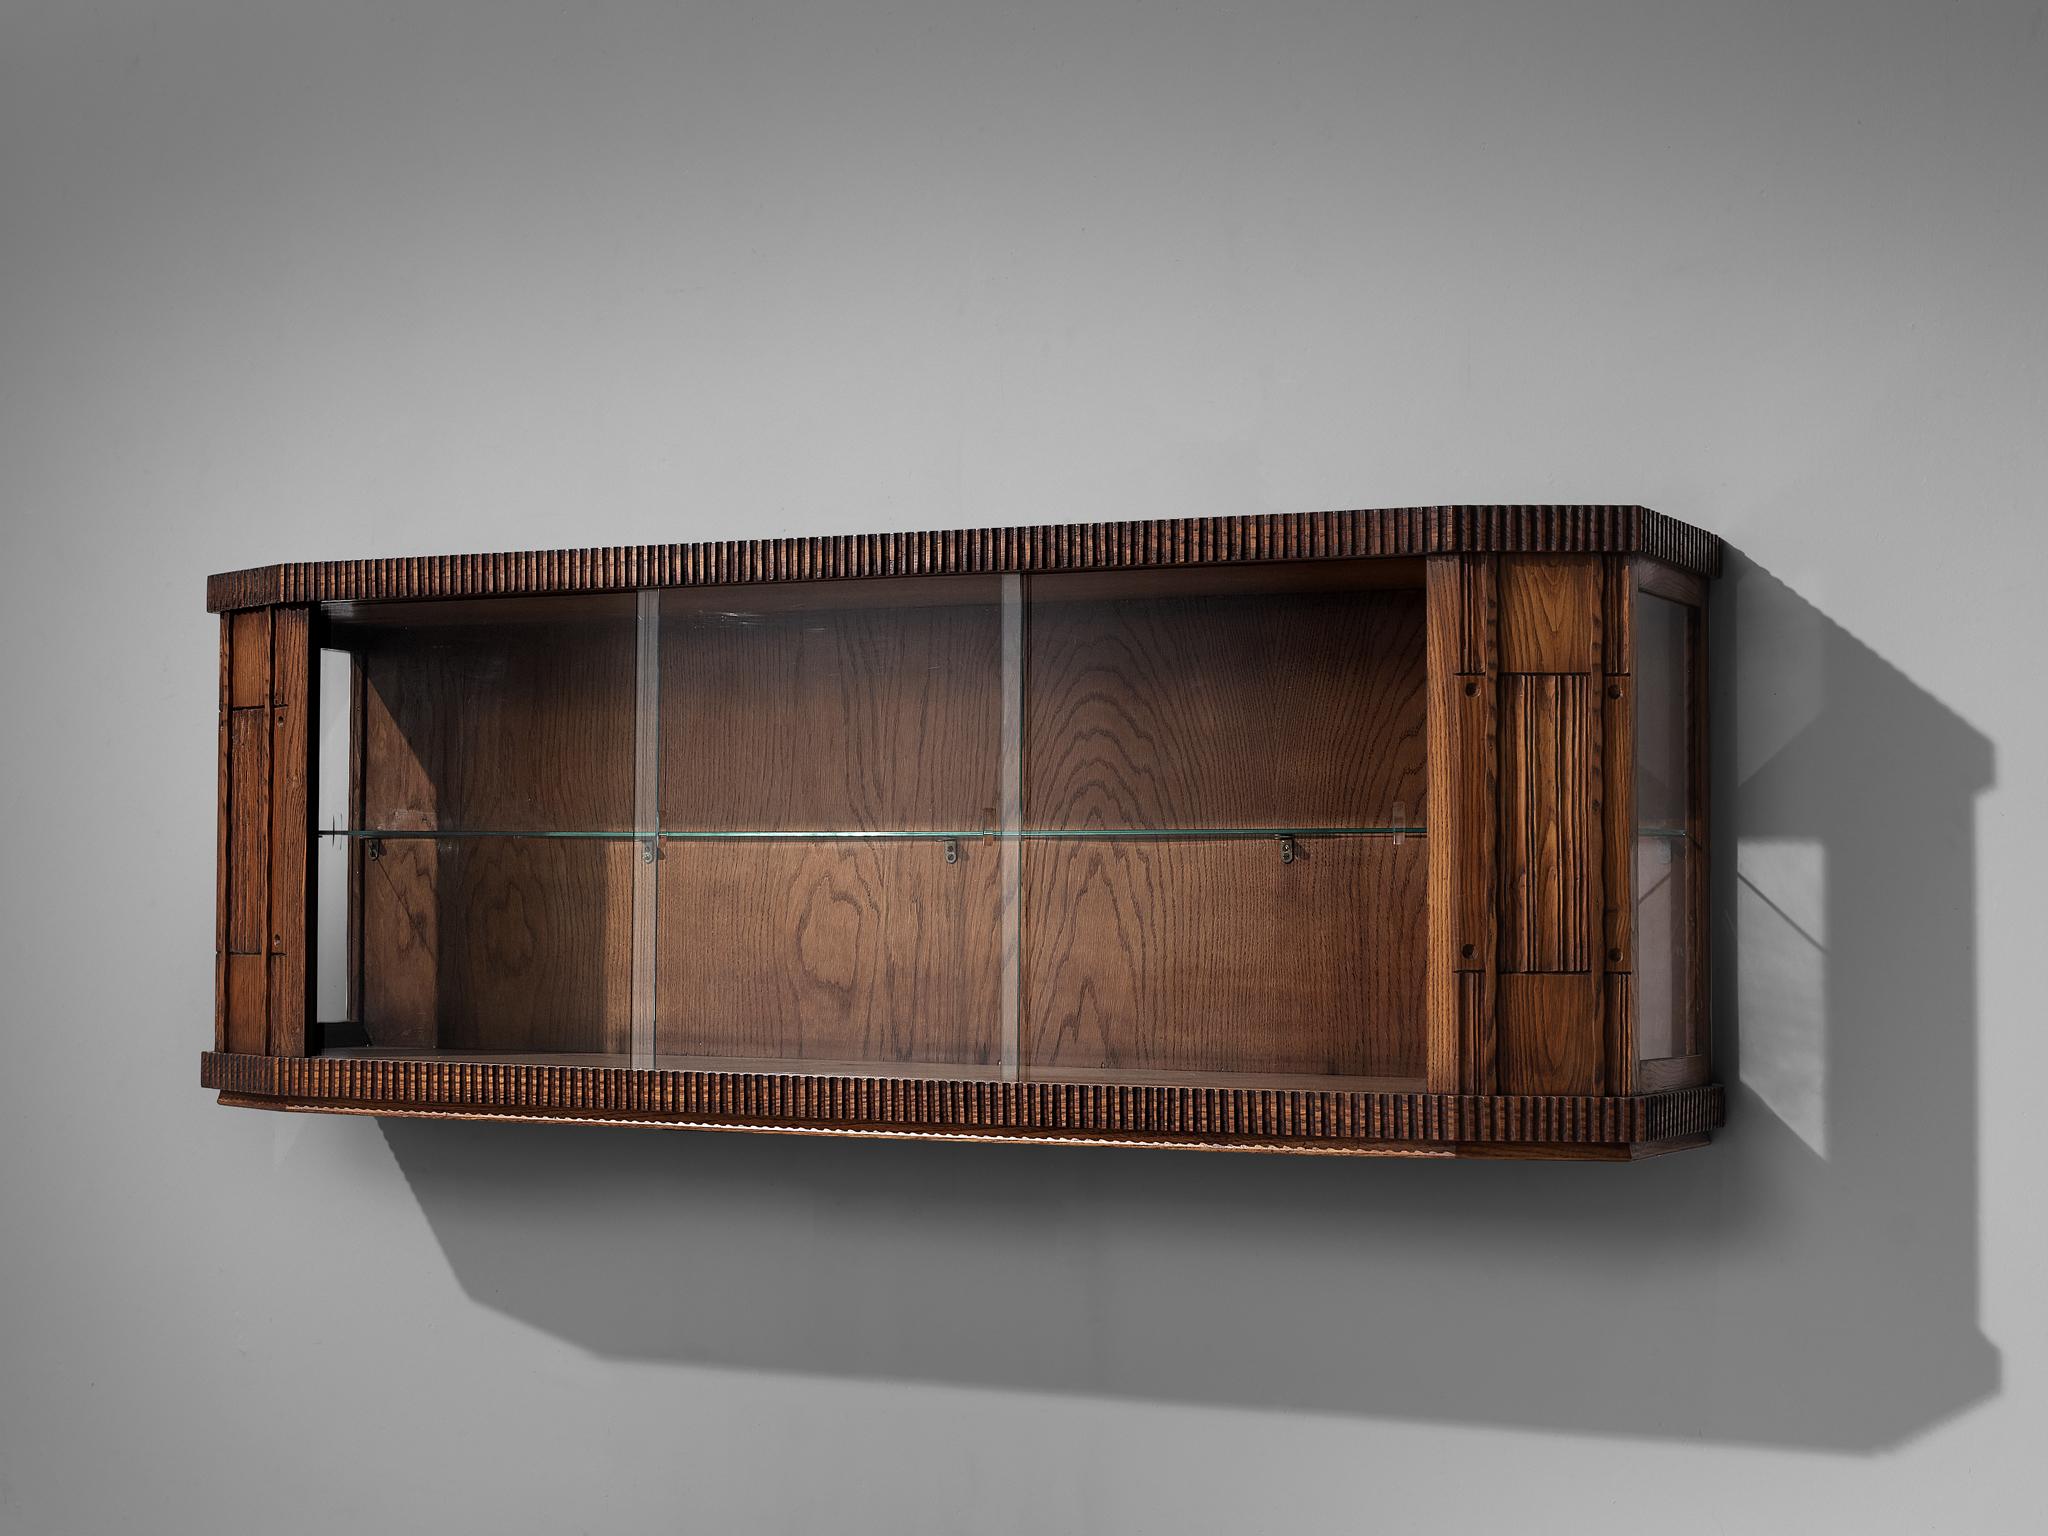 Ernesto Valabrega, showcase, oak, glass, Italy, 1930s. 

This Art Deco showcase is designed by Ernesto Valabrega and can be placed on top of a sideboard or adjusted to a wall. Three glass sliding doors at the front provide access to the inner